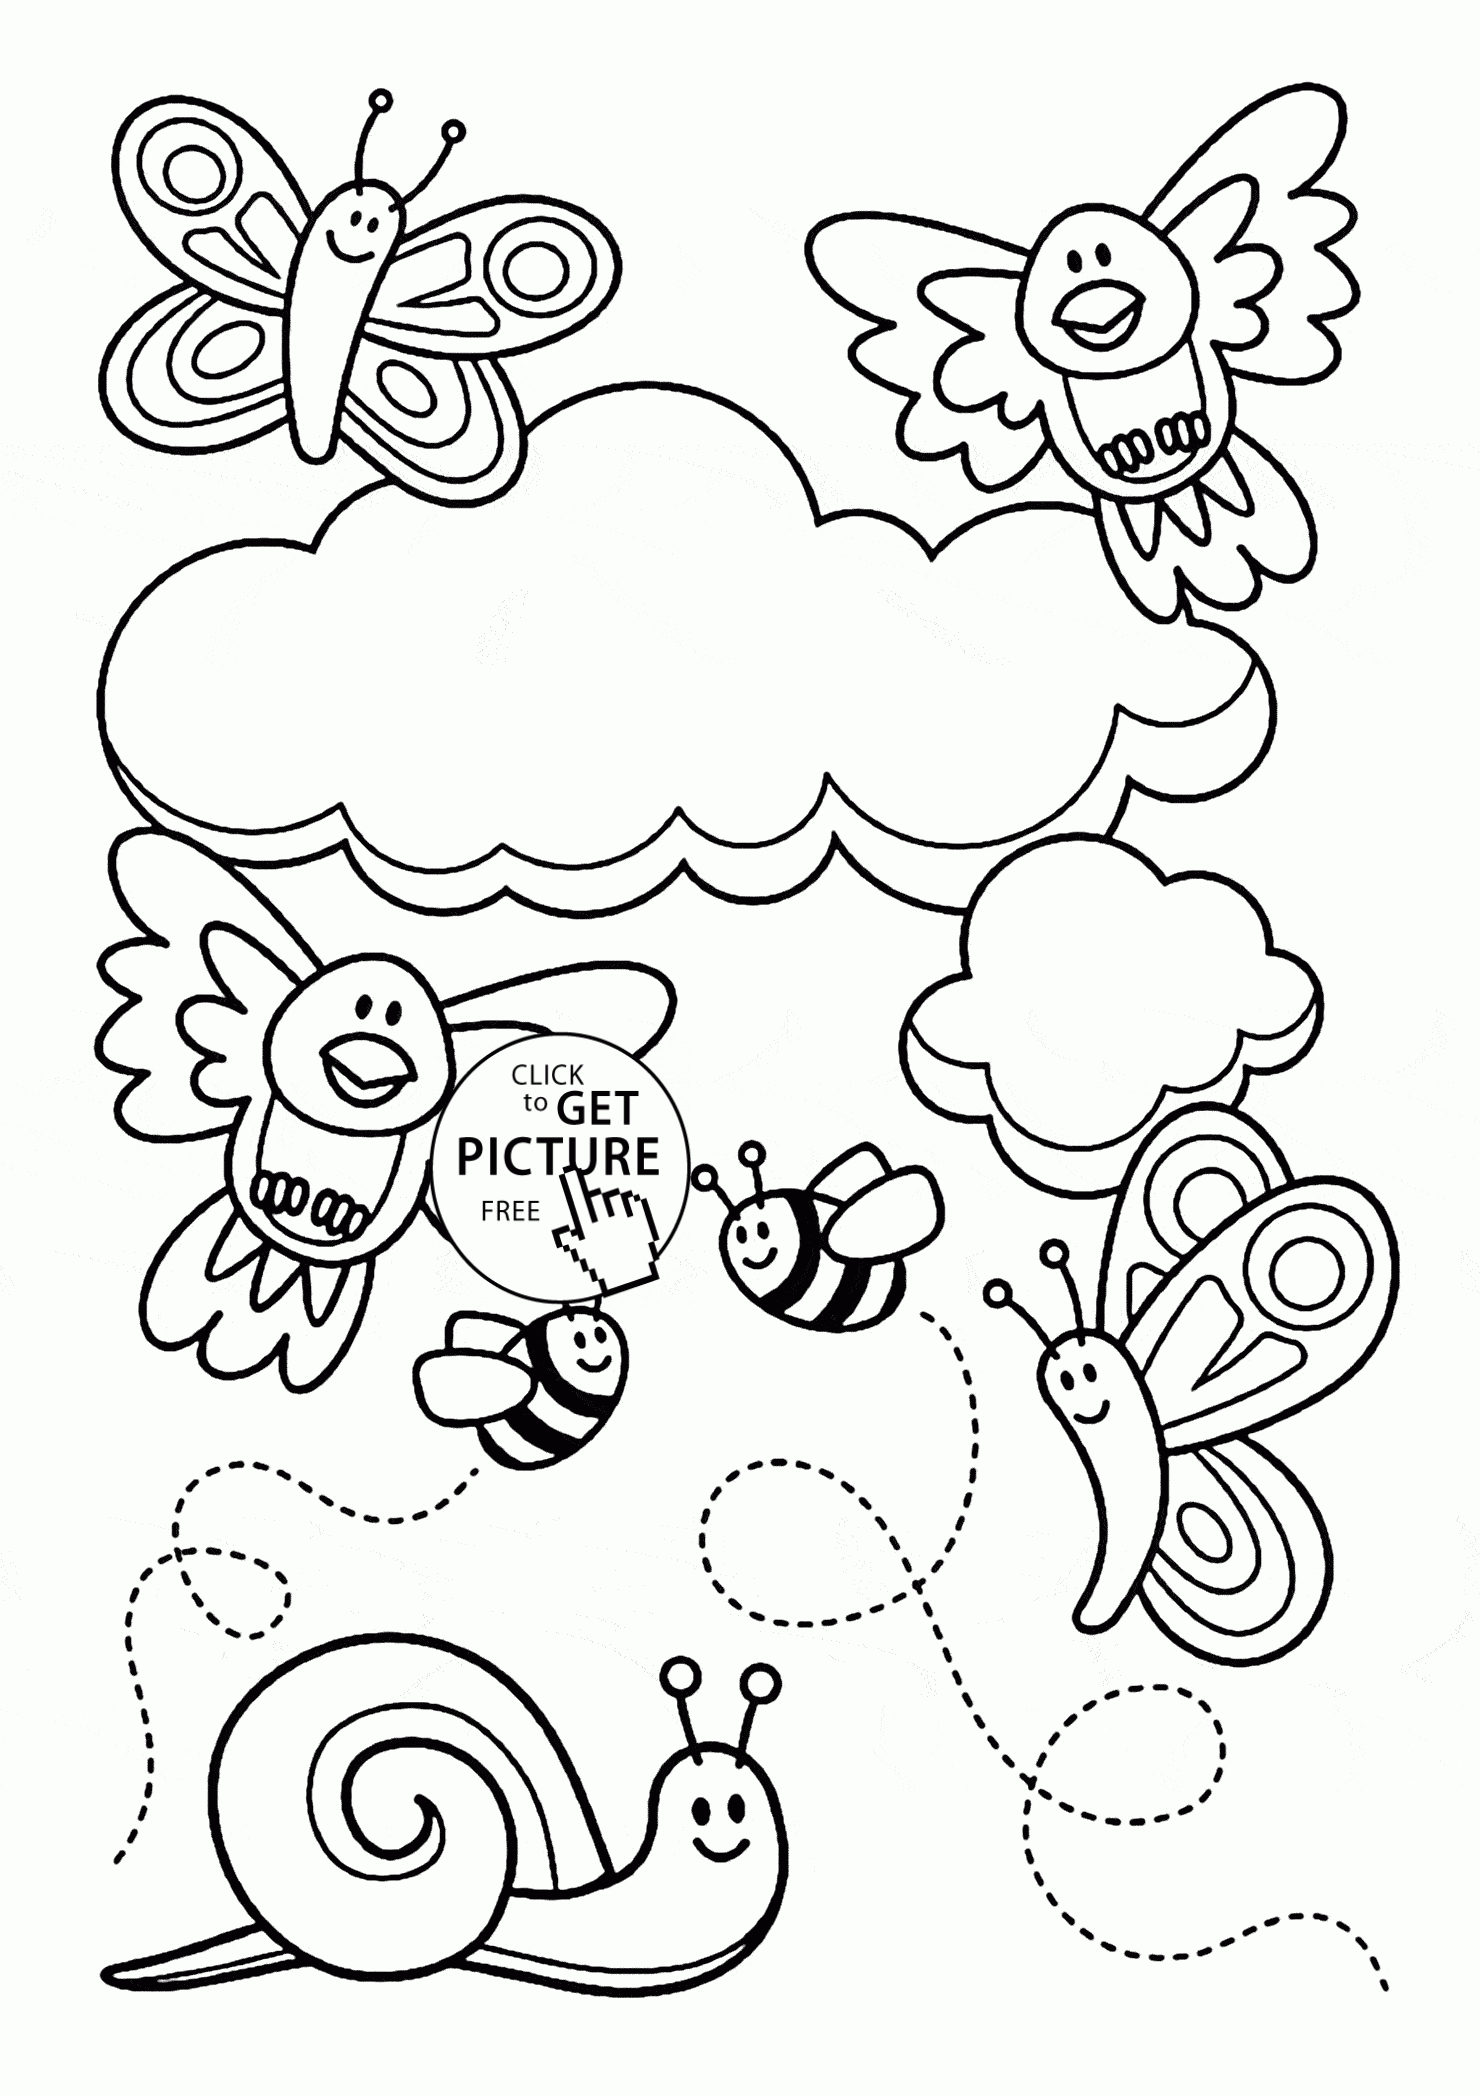 Baby Animal And Spring Coloring Page For Kids, Seasons Coloring - Free Printable Spring Coloring Pages For Adults